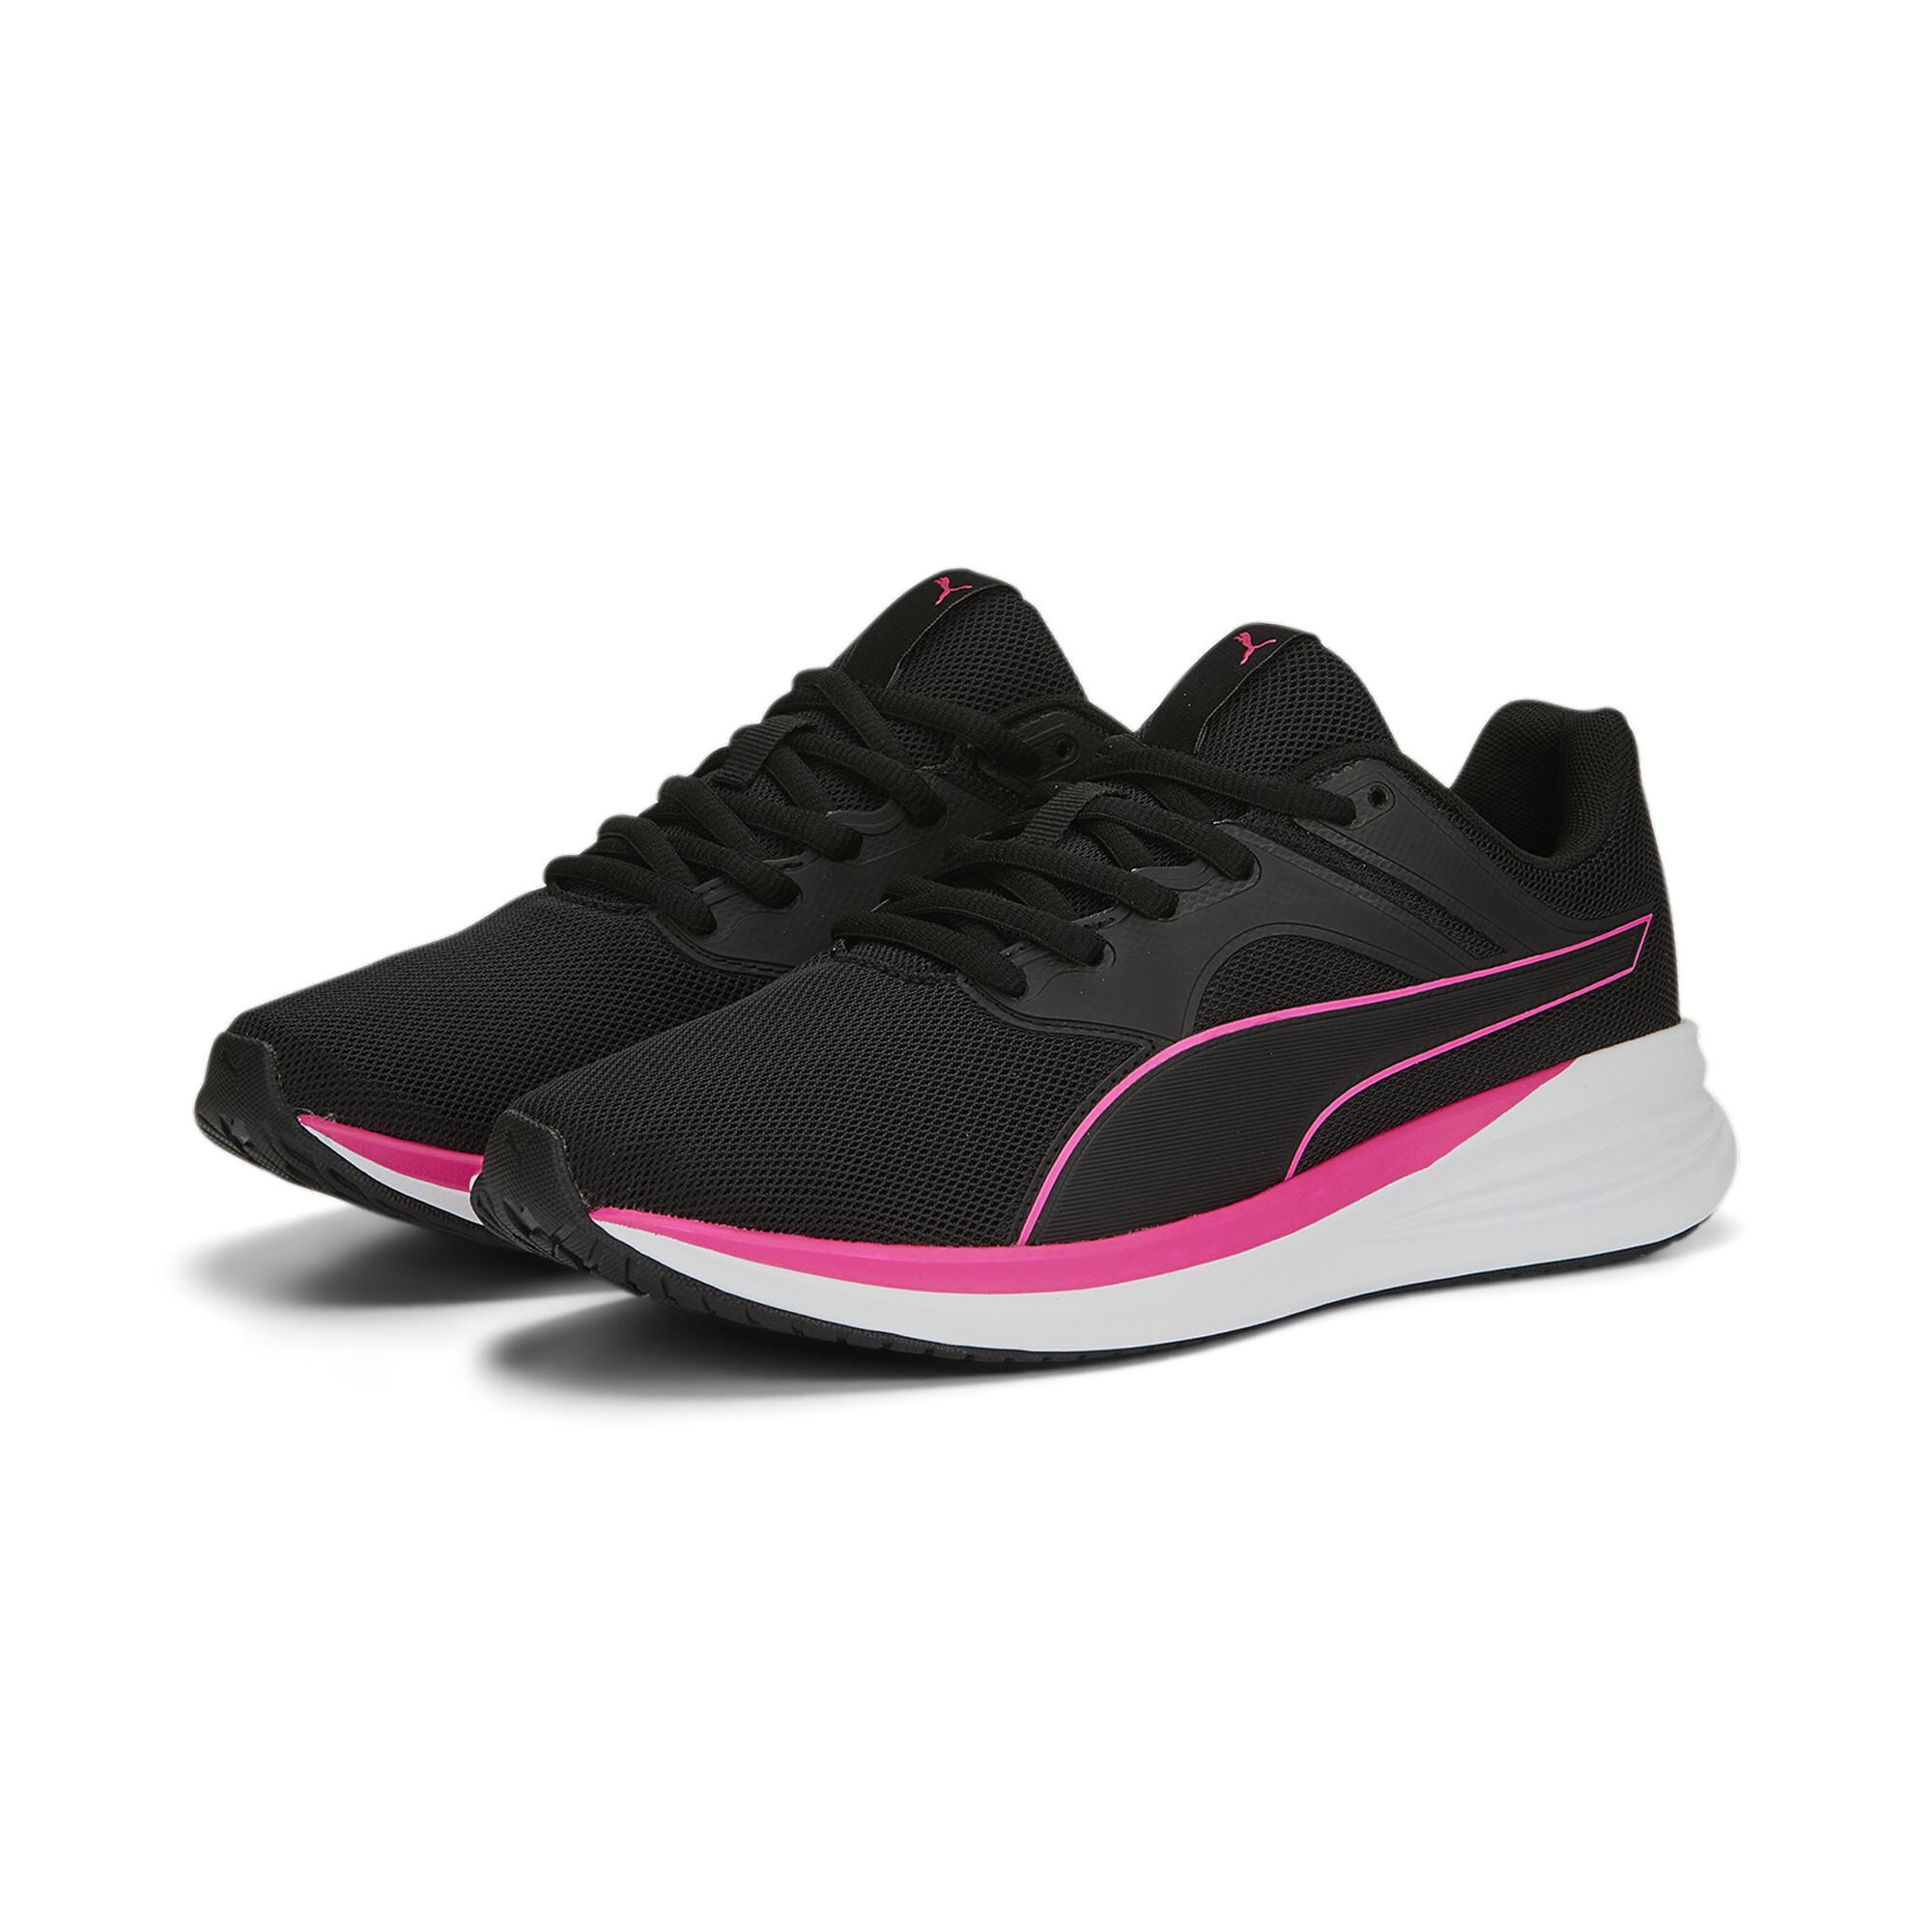 Puma Transport Running Shoes, Black, Size 46, Shoes